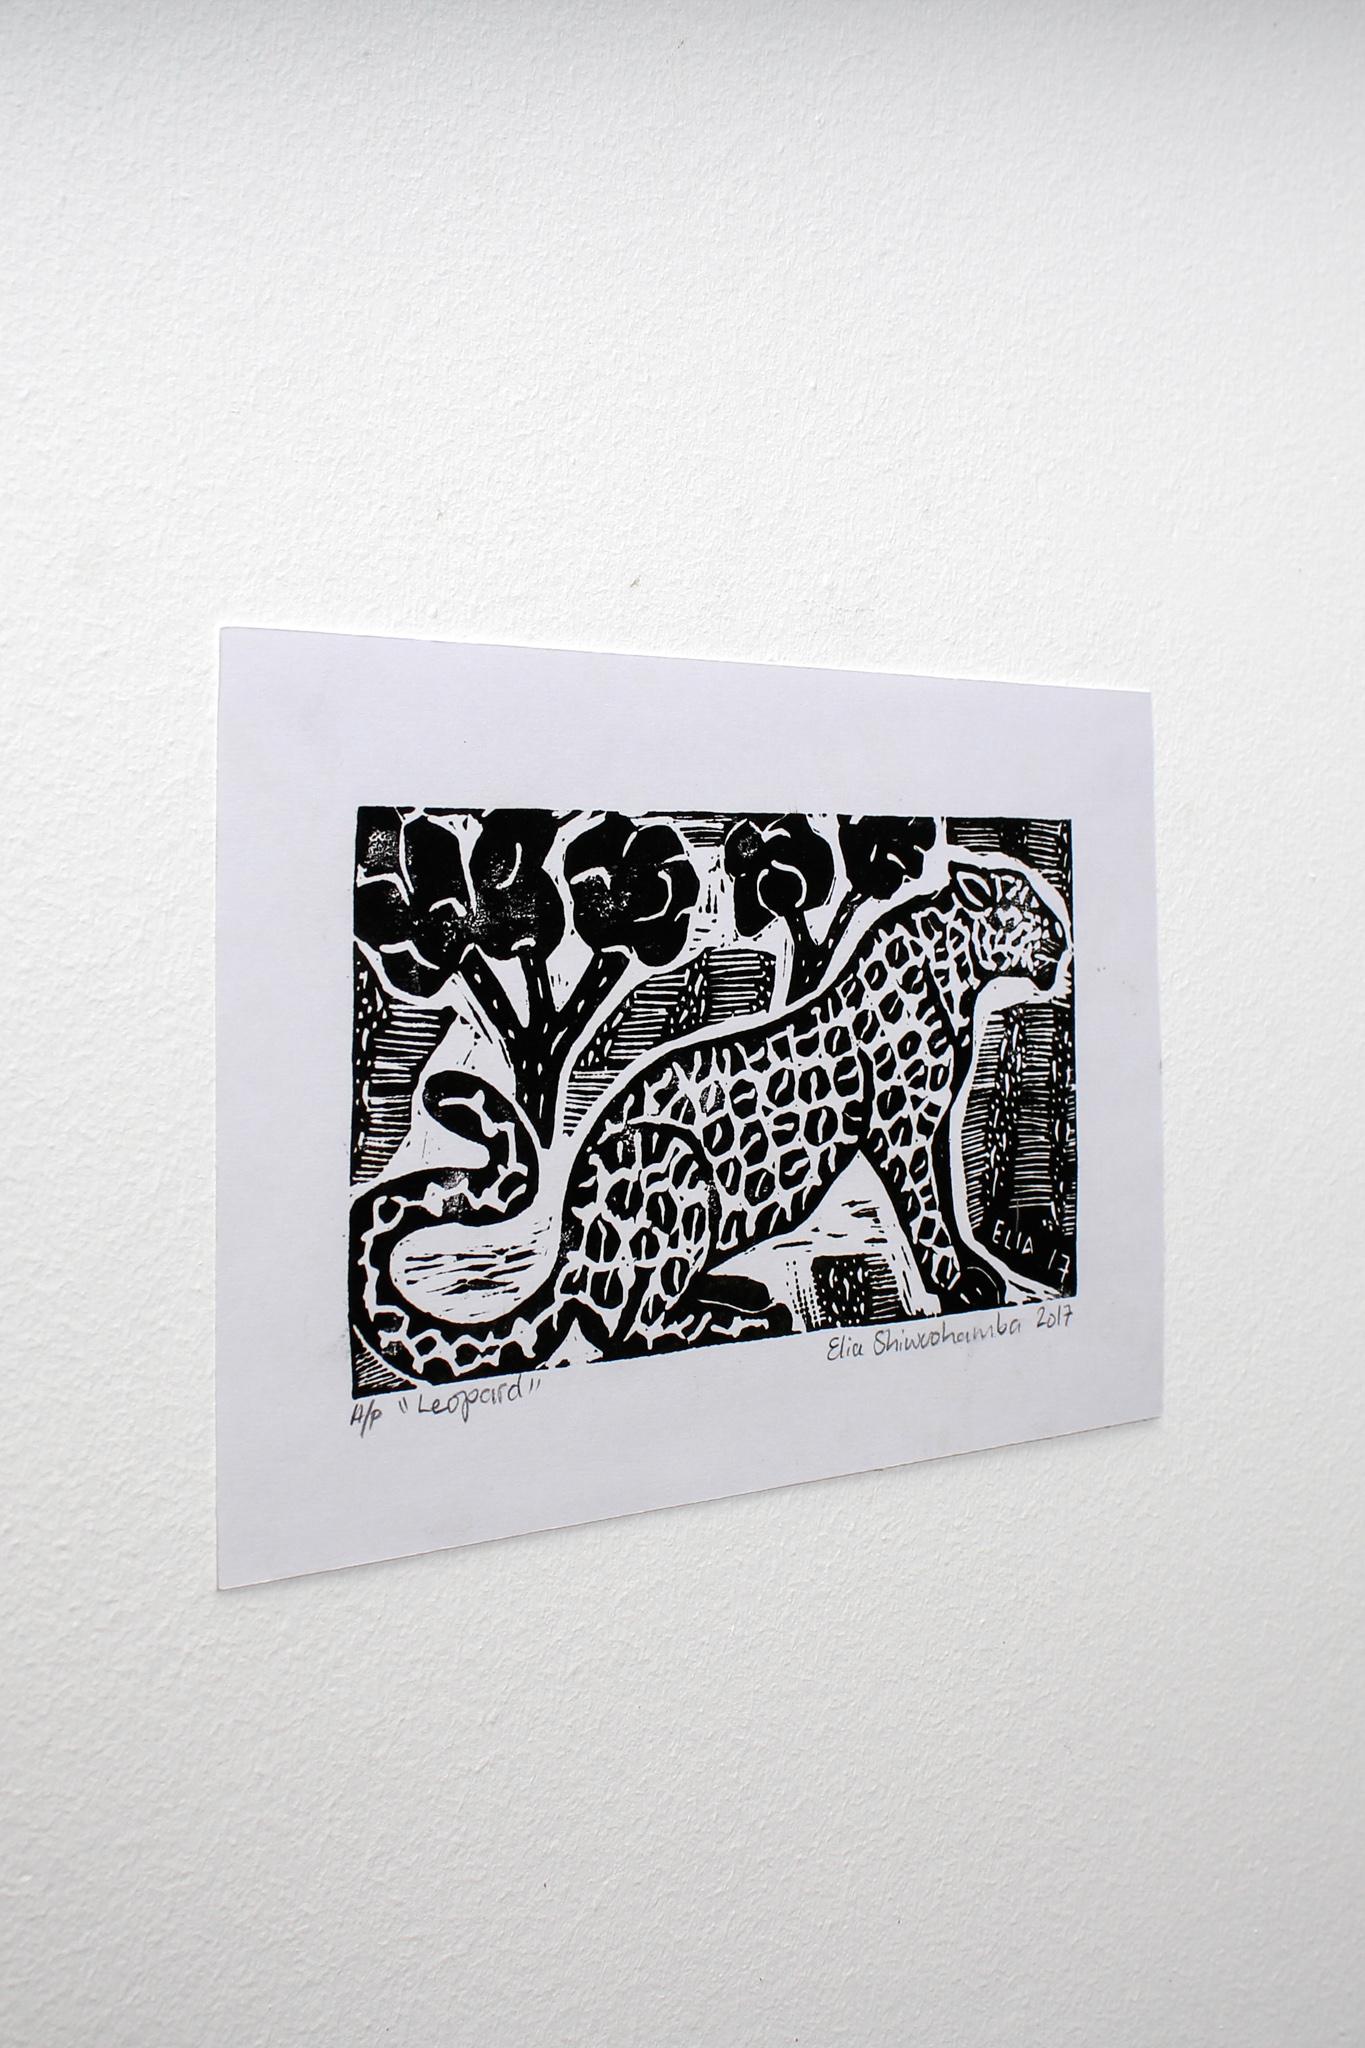 The leopard, Linoleum block prints on paper.

Elia Shiwoohamba was born in 1981 in Windhoek, Namibia. He graduated from the John Muafangejo Art Centre in Windhoek in 2006. Specialising in printmaking and sculpture, Shiwoohamba works as a